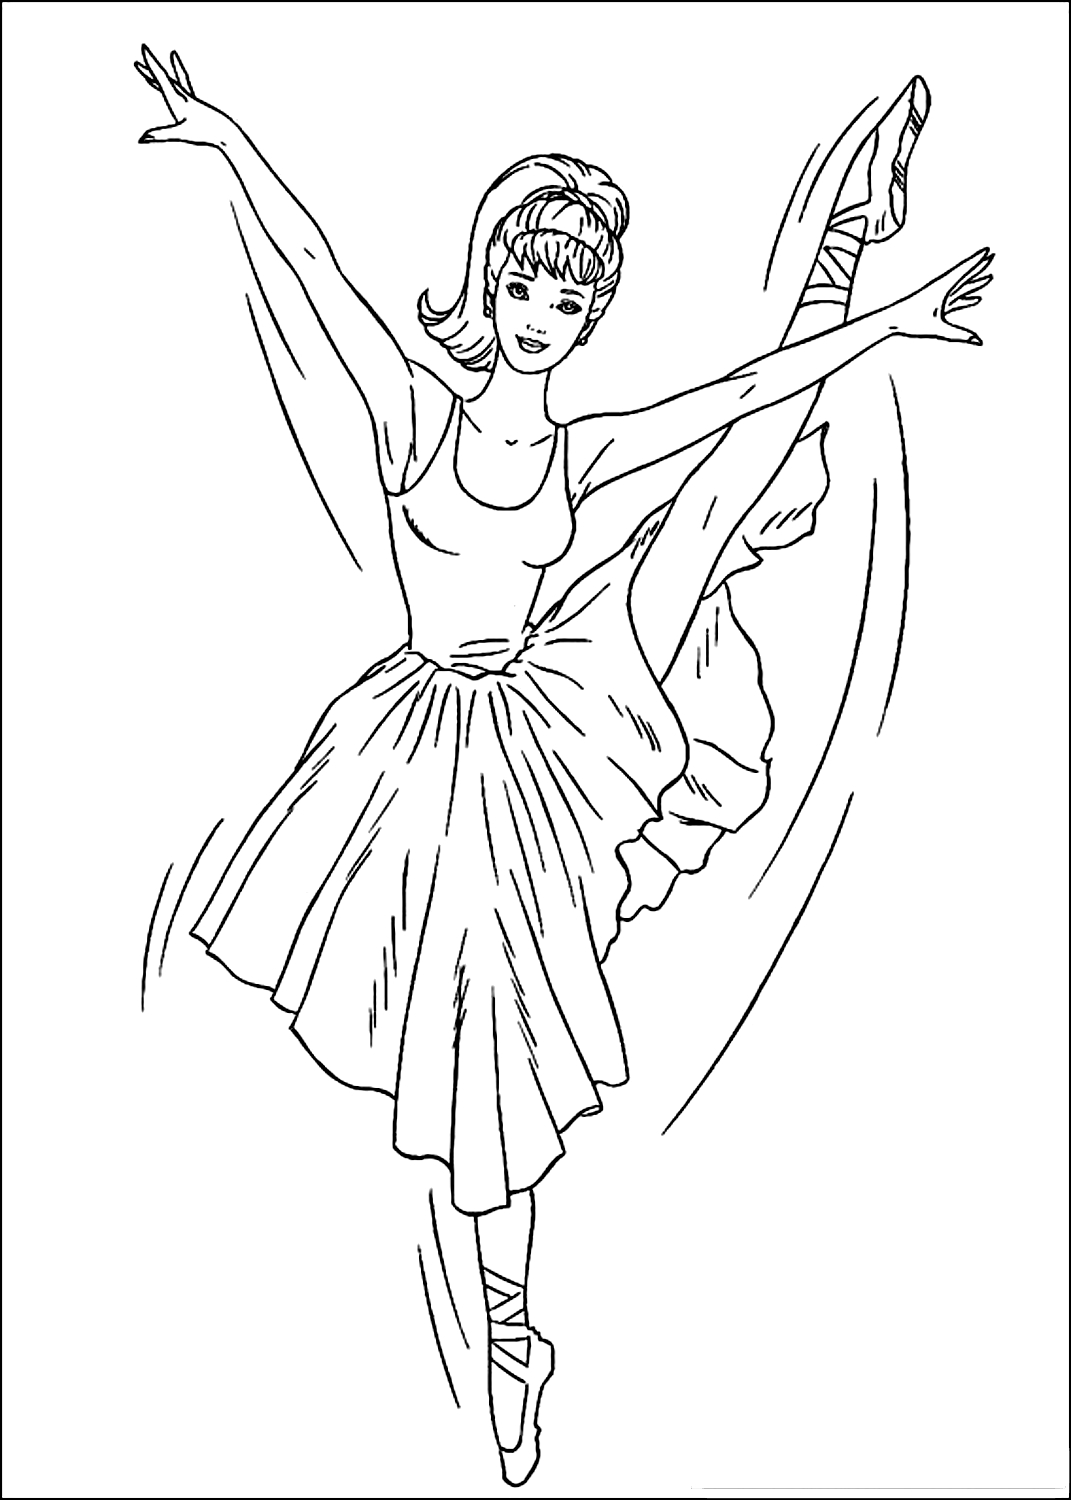 Barbie 45  coloring page to print and coloring